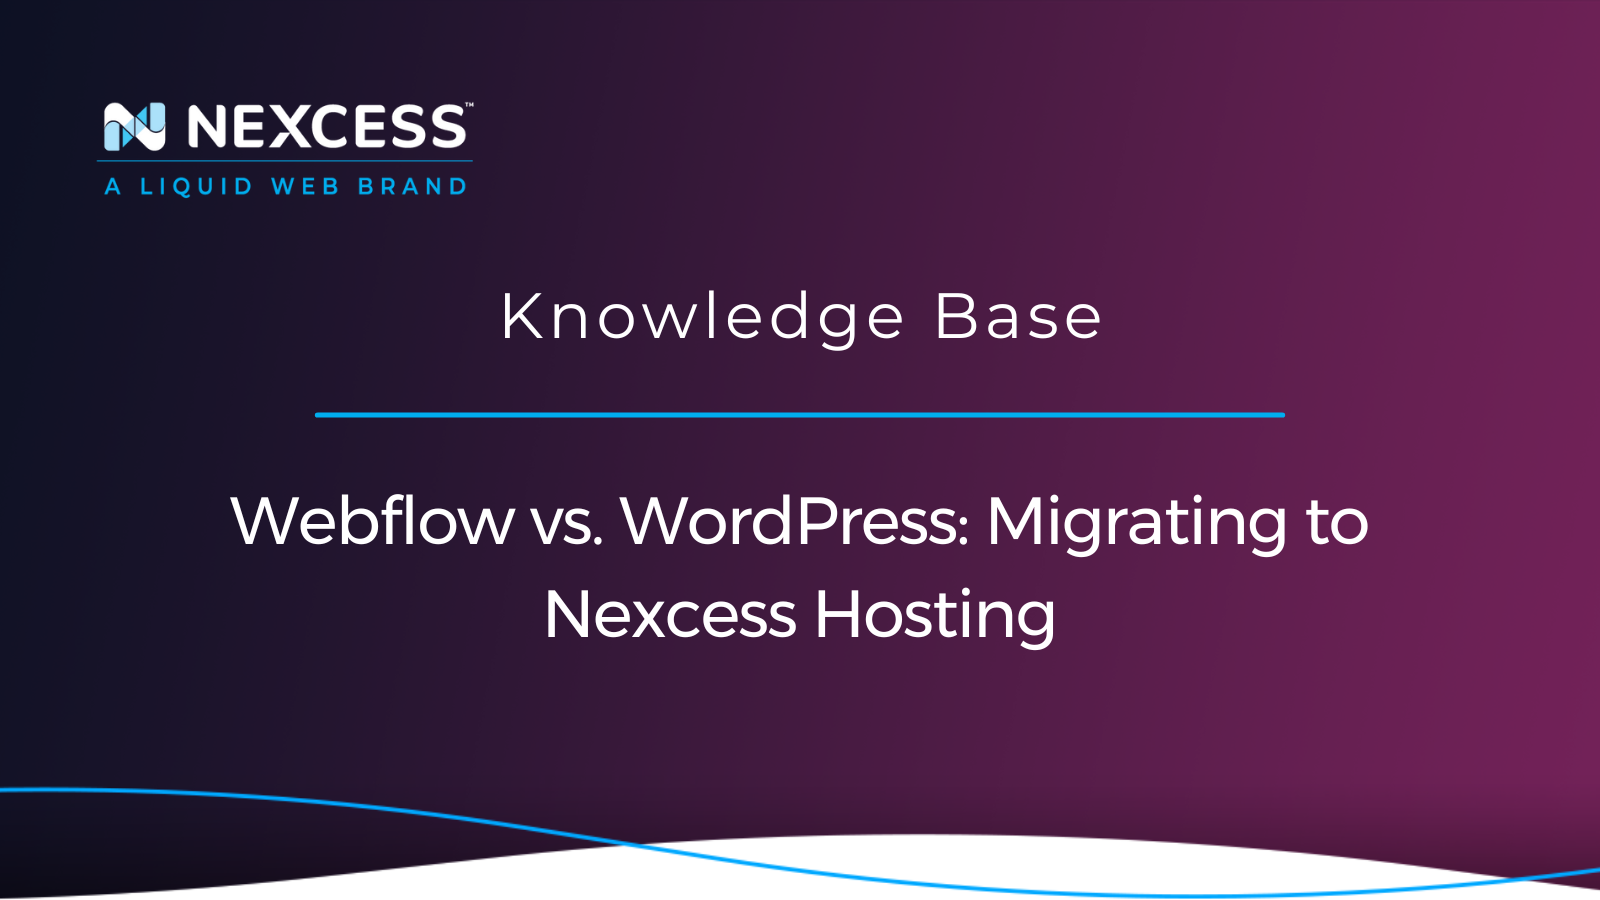 Migrating to Nexcess Hosting from Webflow